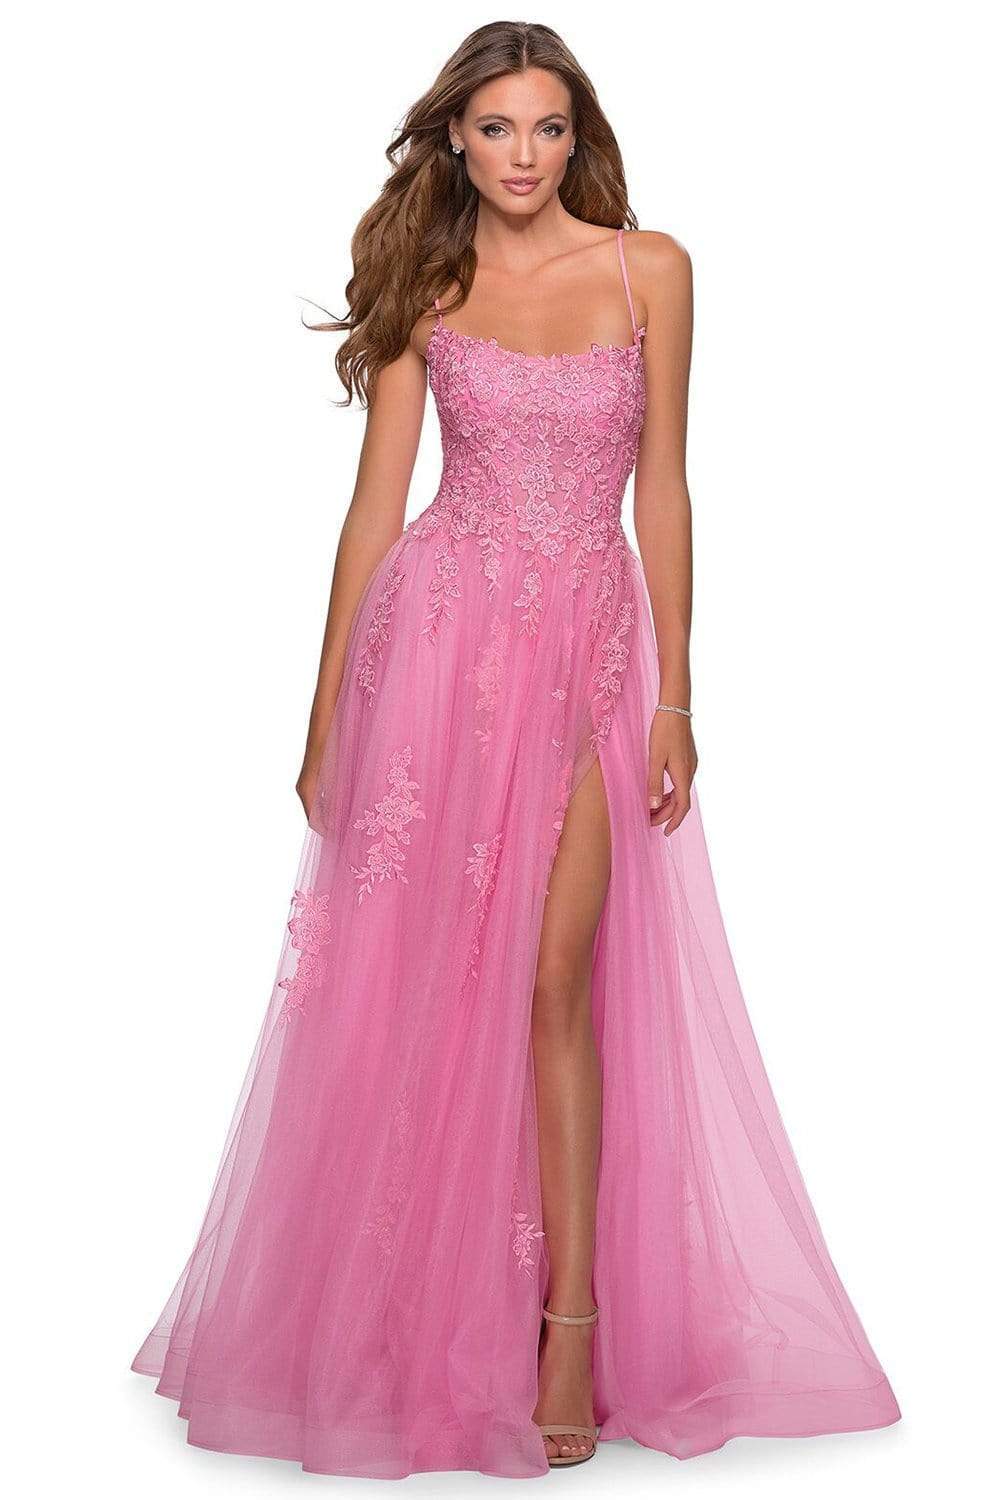 Image of La Femme - 28470 Floral Appliqued A-Line Simple Prom Tulle Gown